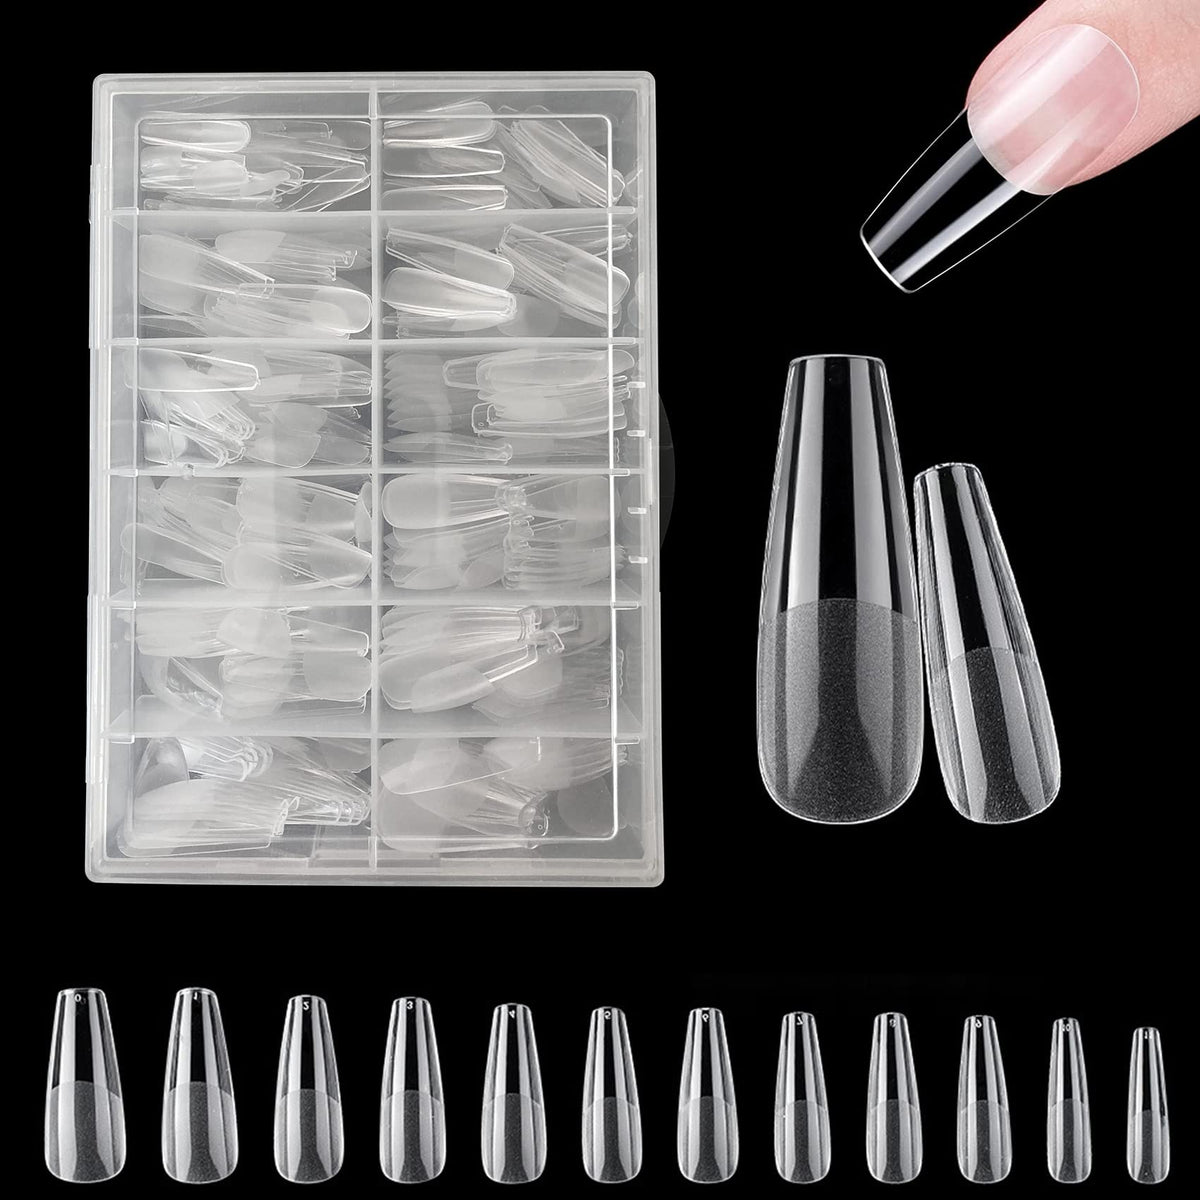 Nail Tips - 420PCS Soft Gel Full Cover Nail Tips Kit for Nails Extensions, ZAHRVIA Clear Acrylic Glue Tips No File False French Nail Tips for Manicure Salons Nail Art (Long Coffin)